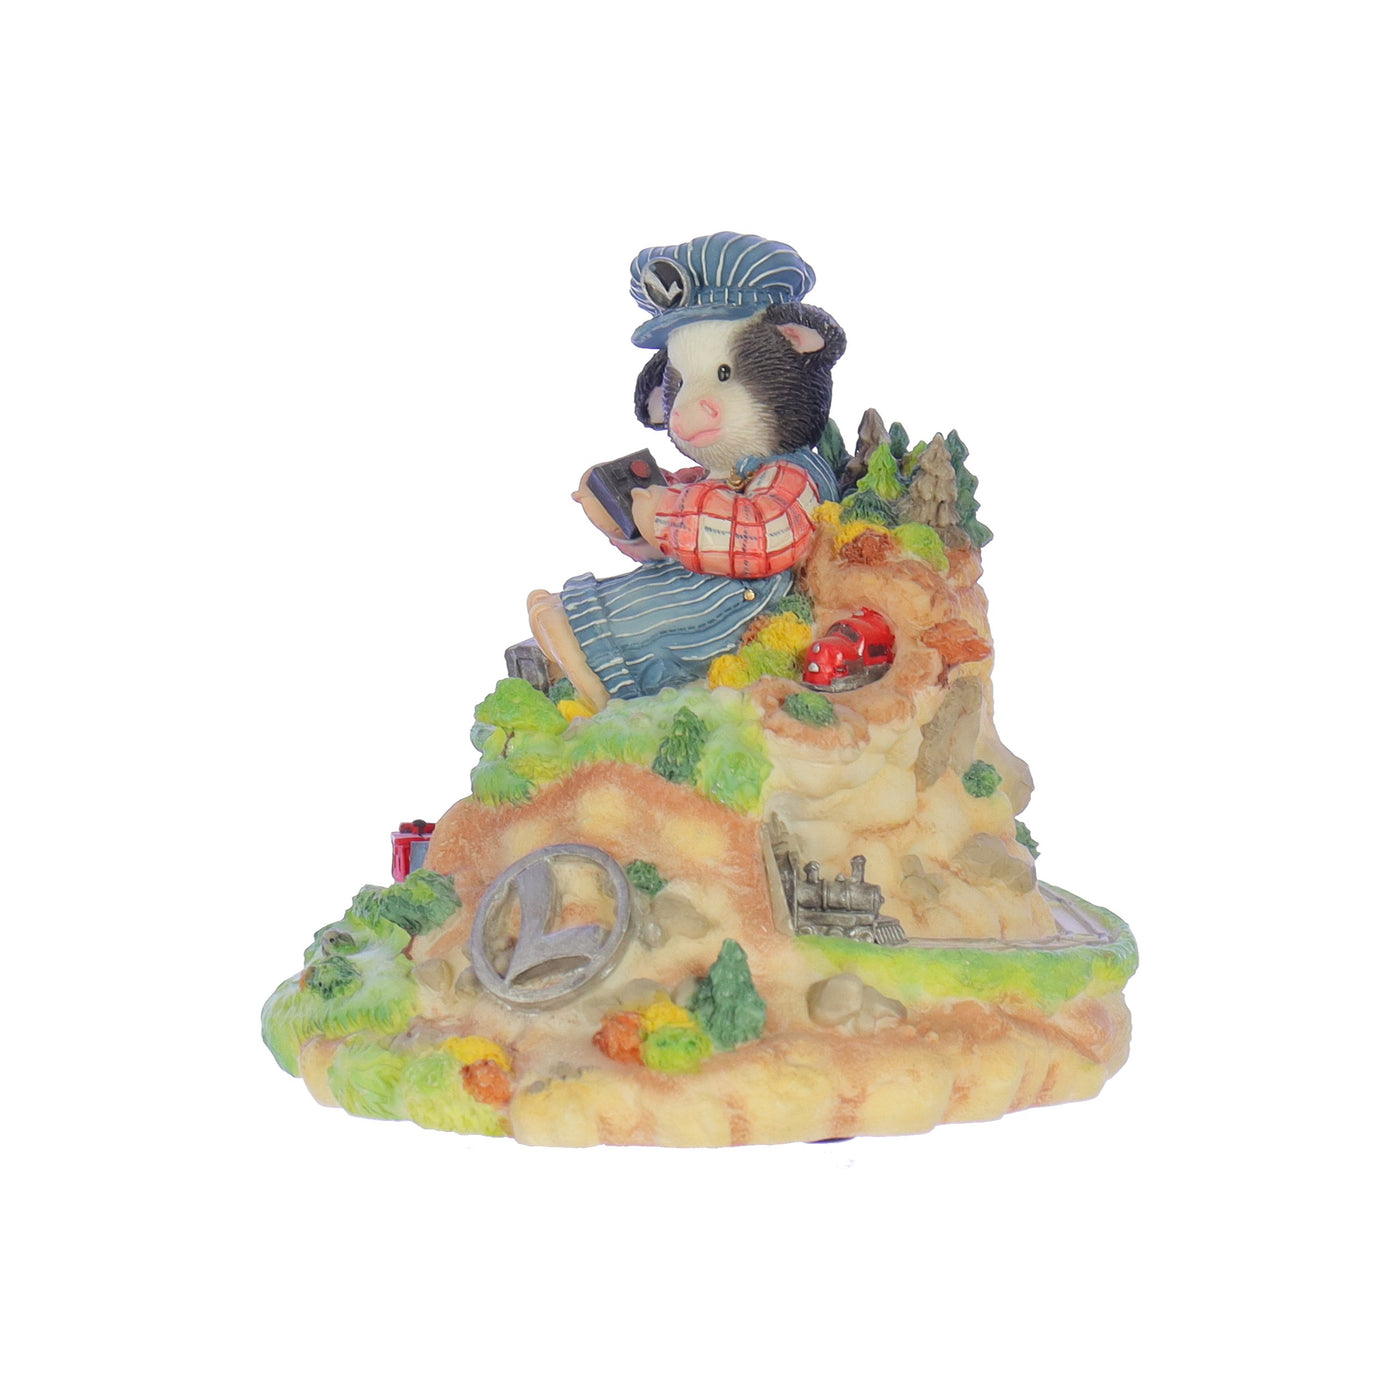 Marys-Moo-Moos-by-Mary-Rhyner-Nadig-Resin-Figurine-Youre-On-The-Right-Track-671088